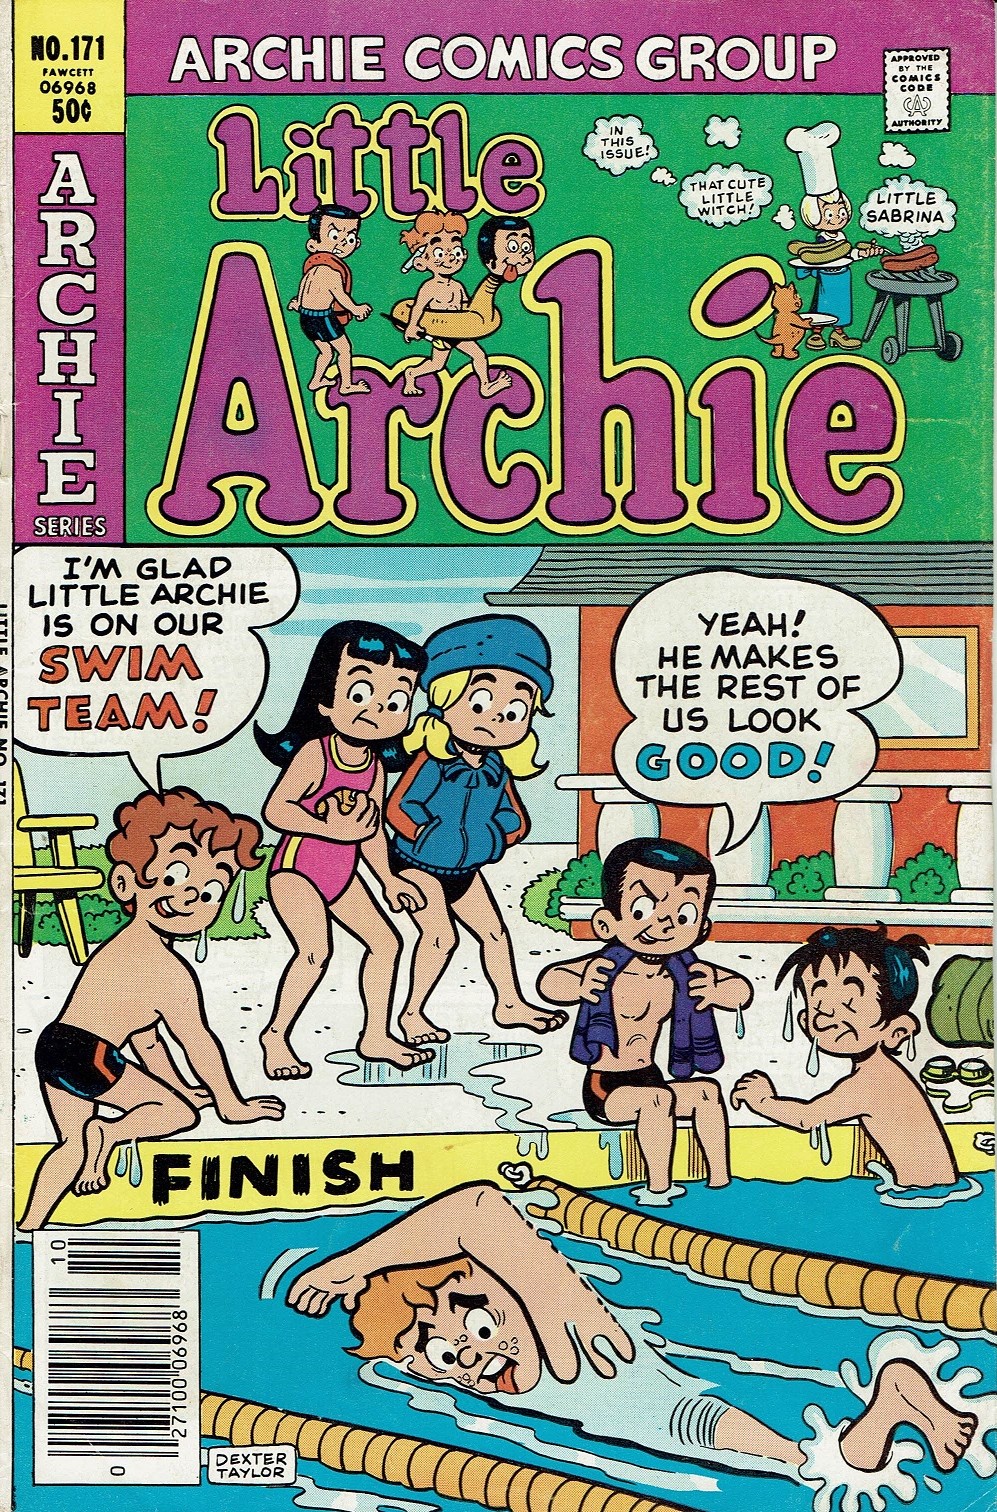 Read online The Adventures of Little Archie comic -  Issue #171 - 1